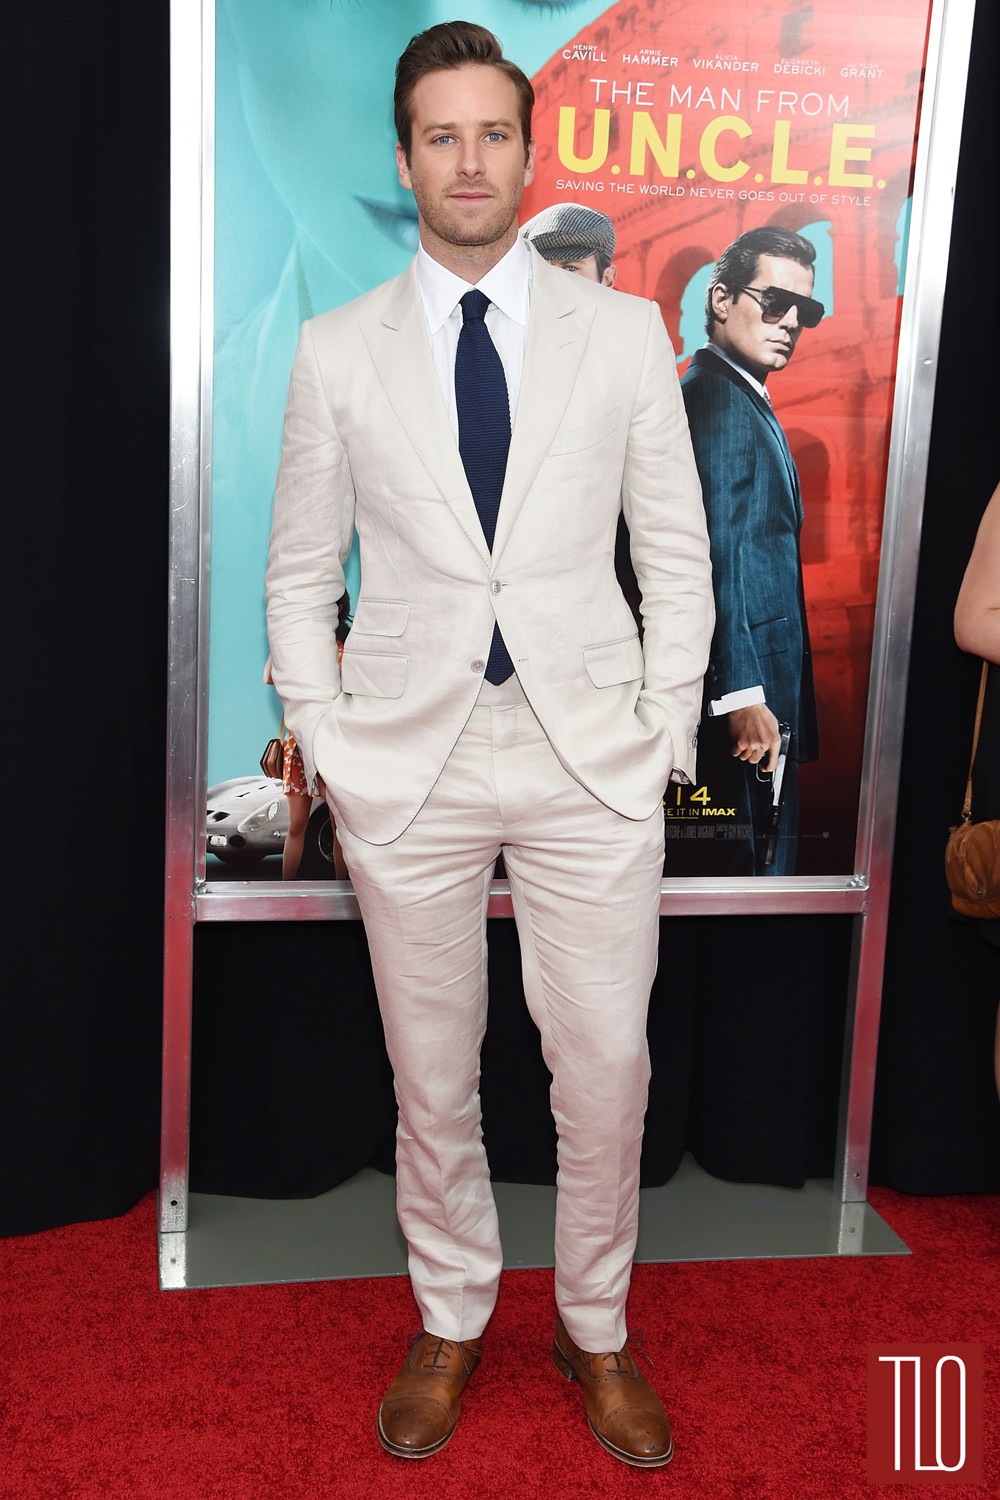 Armie-Hammer-The-Man-From-UNCLE-New-York-Movie-Premiere-Red-Carpet-Fashion-Tom-Ford-Tom-Lorenzo-Site-TLO (1)